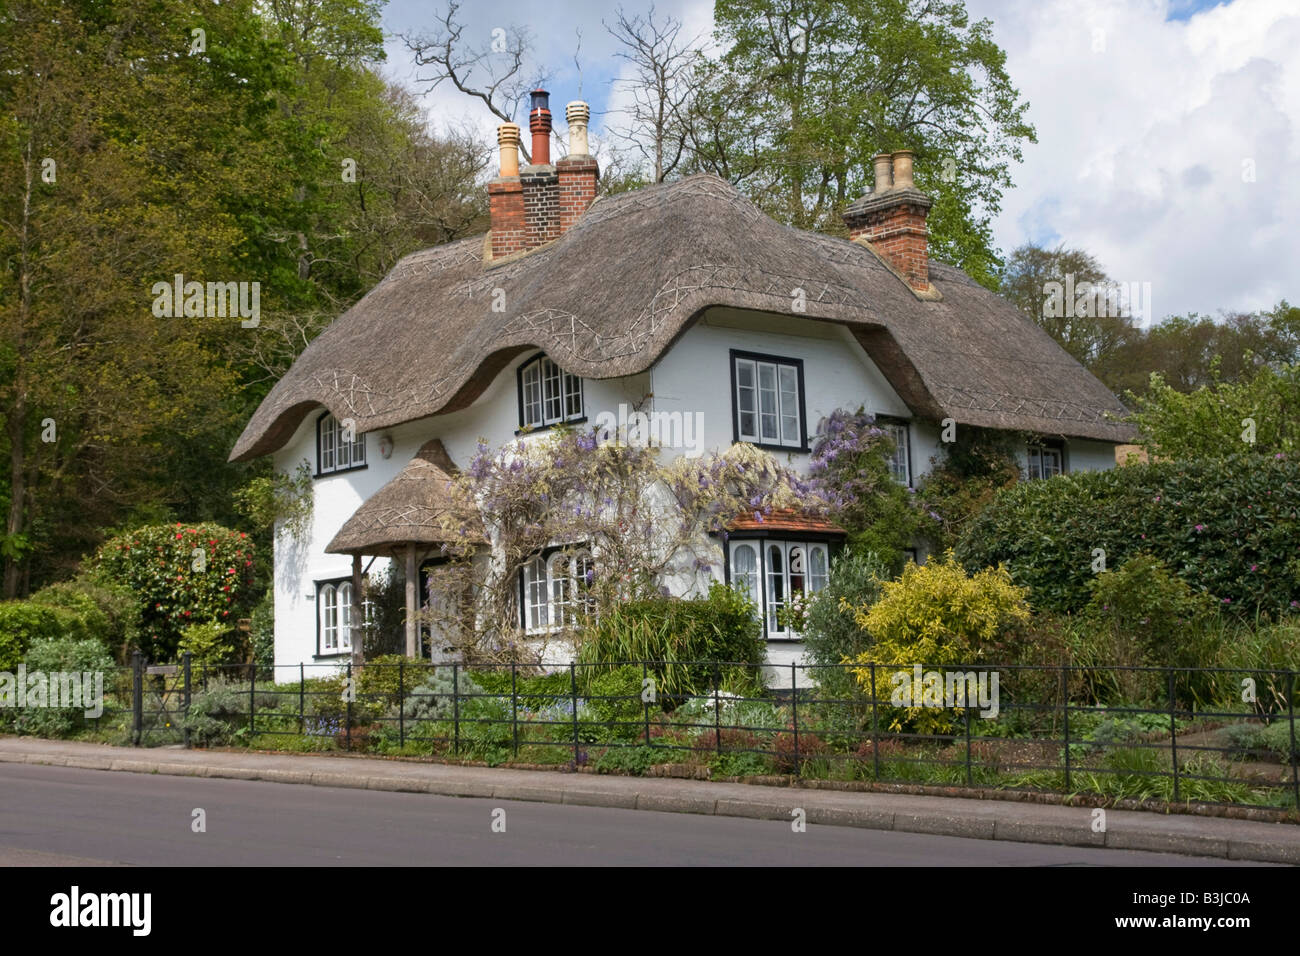 Thatched Cottage, New Forest, Hampshire, UK Stock Photo